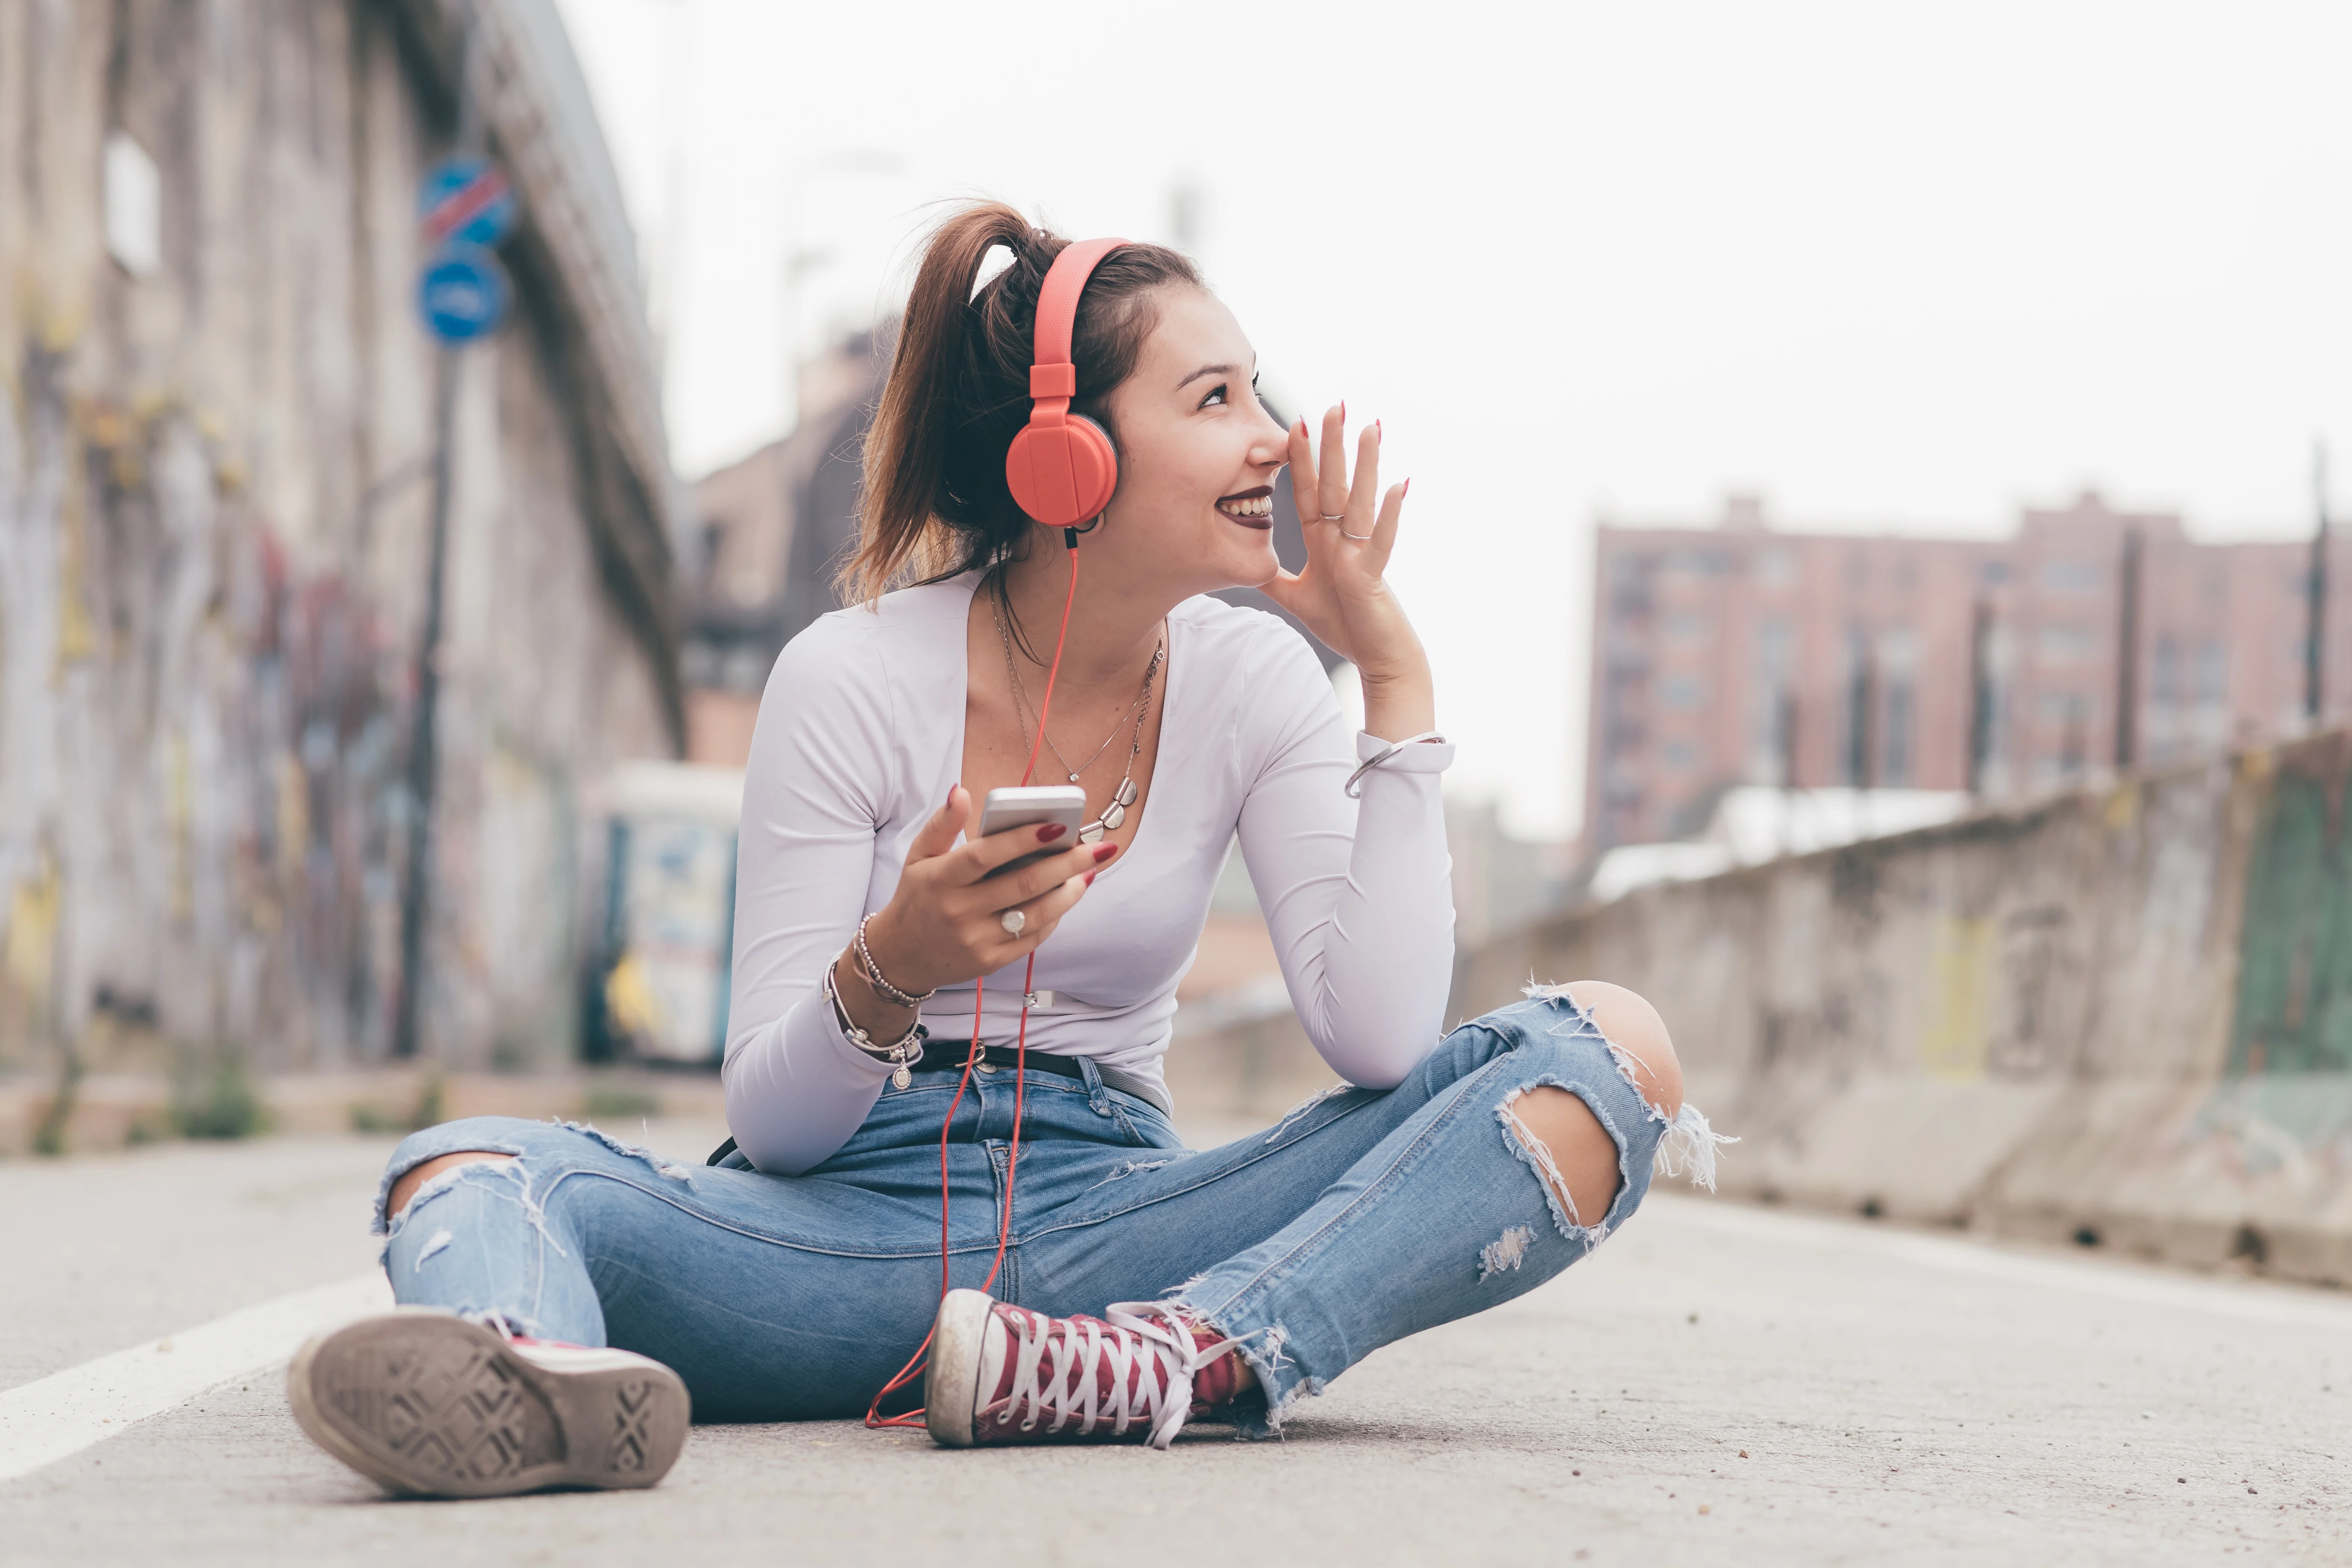 Girl sitting on the ground outside smiling and listening to music